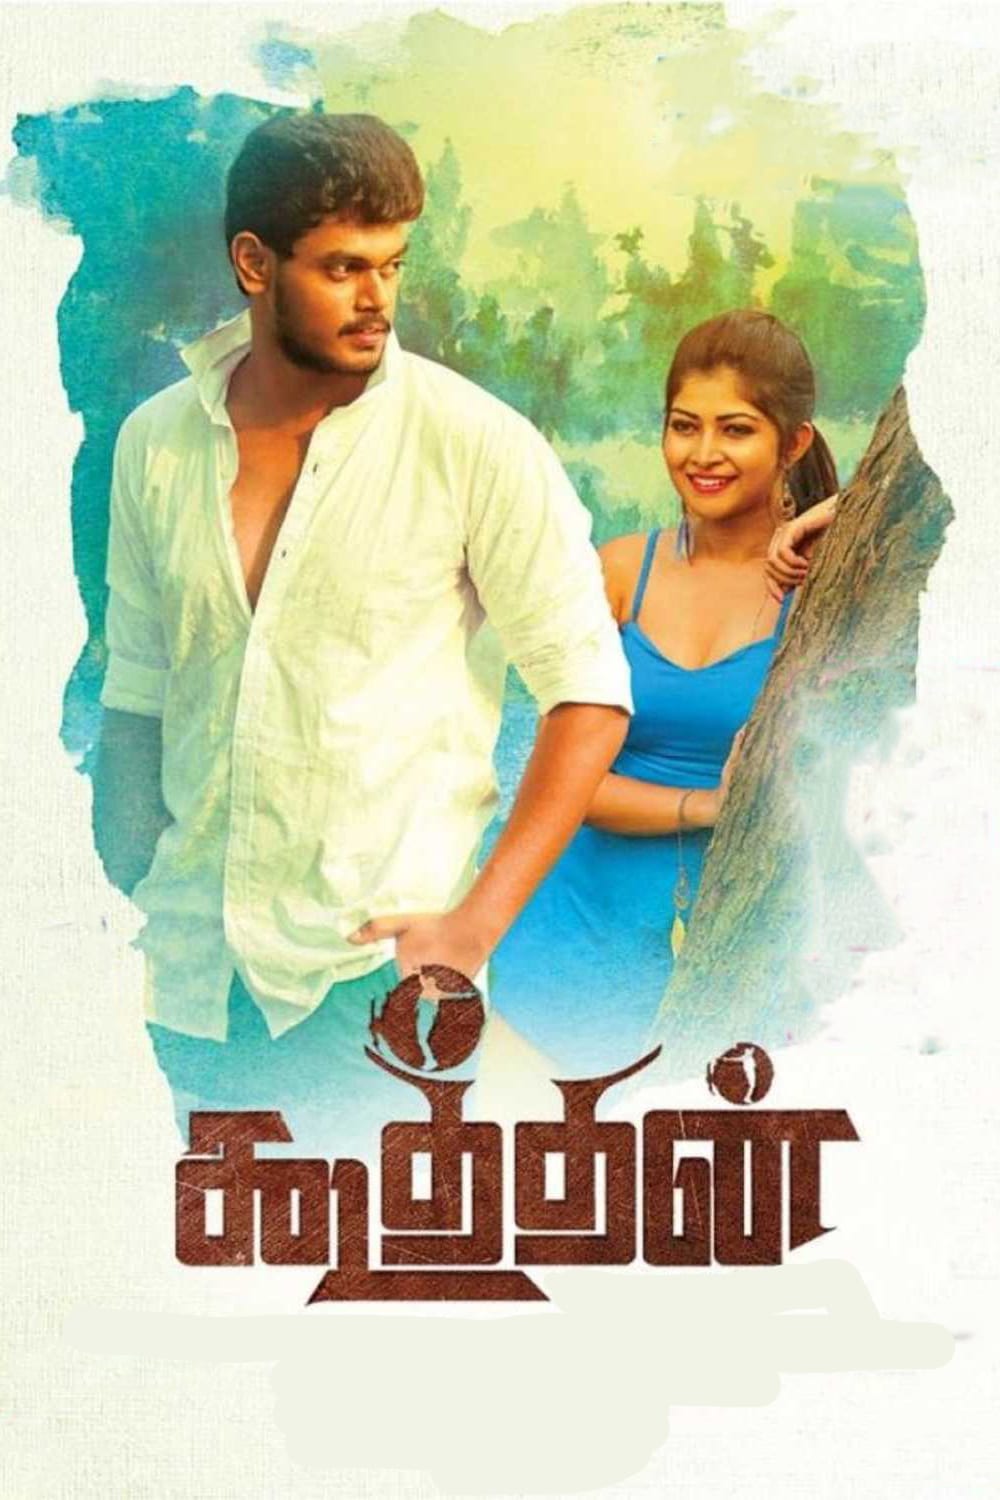 Poster for the movie "Koothan"